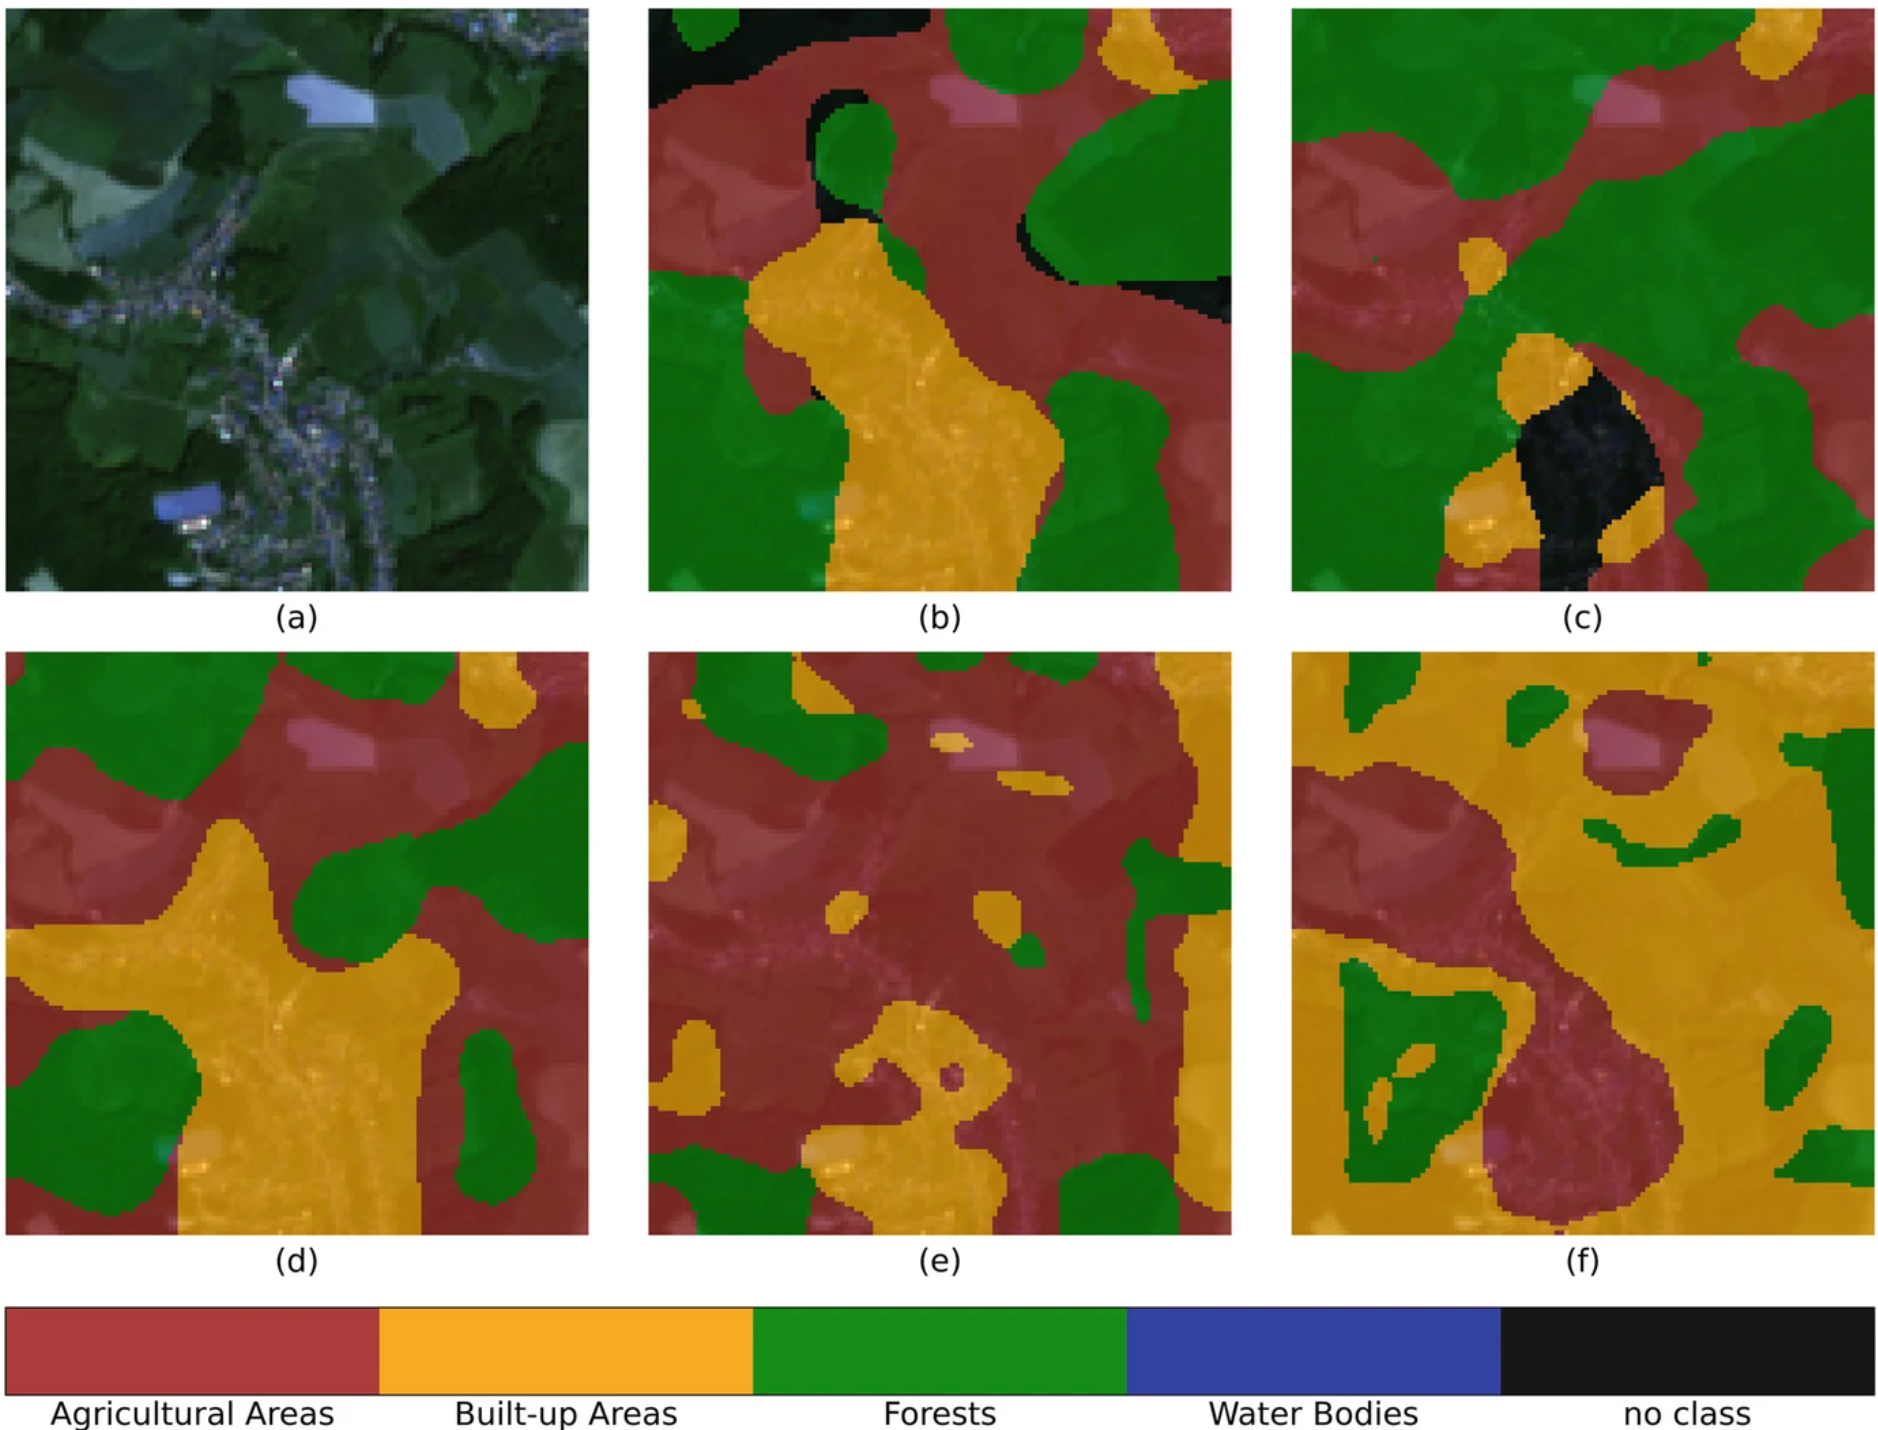 IDEAL-VGI: Analyzing and Improving the Quality and Fitness for Purpose of OpenStreetMap as Labels in Remote Sensing Applications